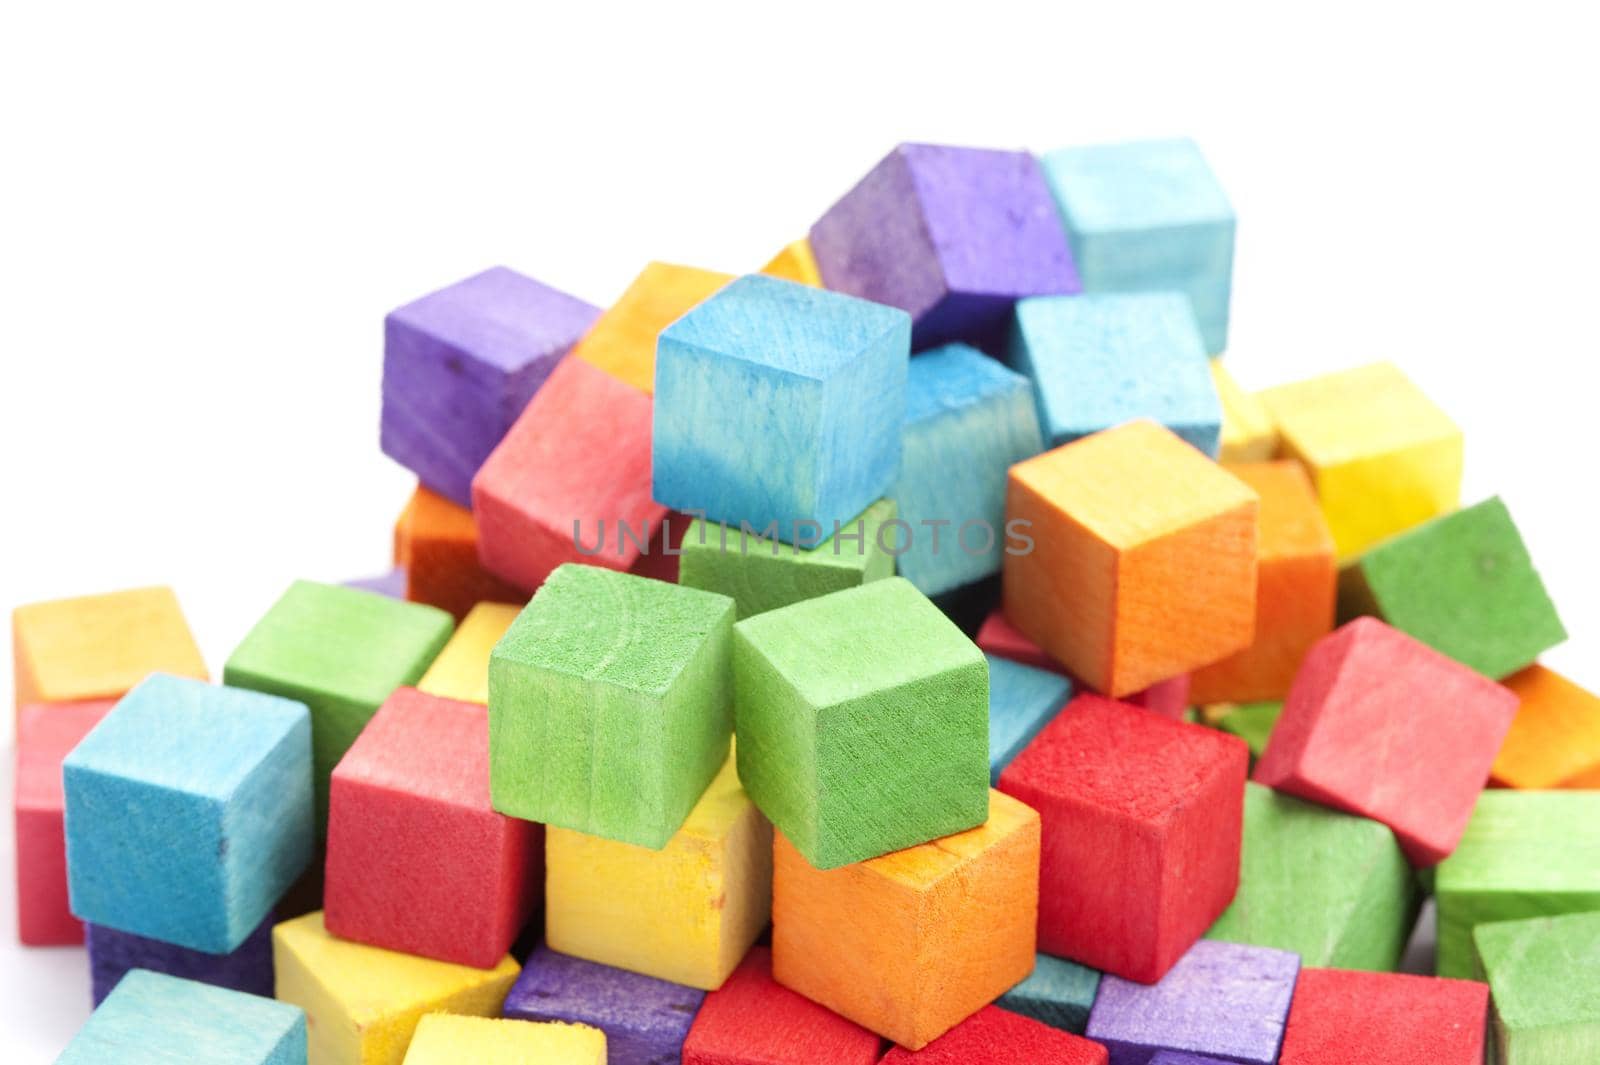 Jumbled Pile of Colorful Wooden Toy Blocks by sanisra